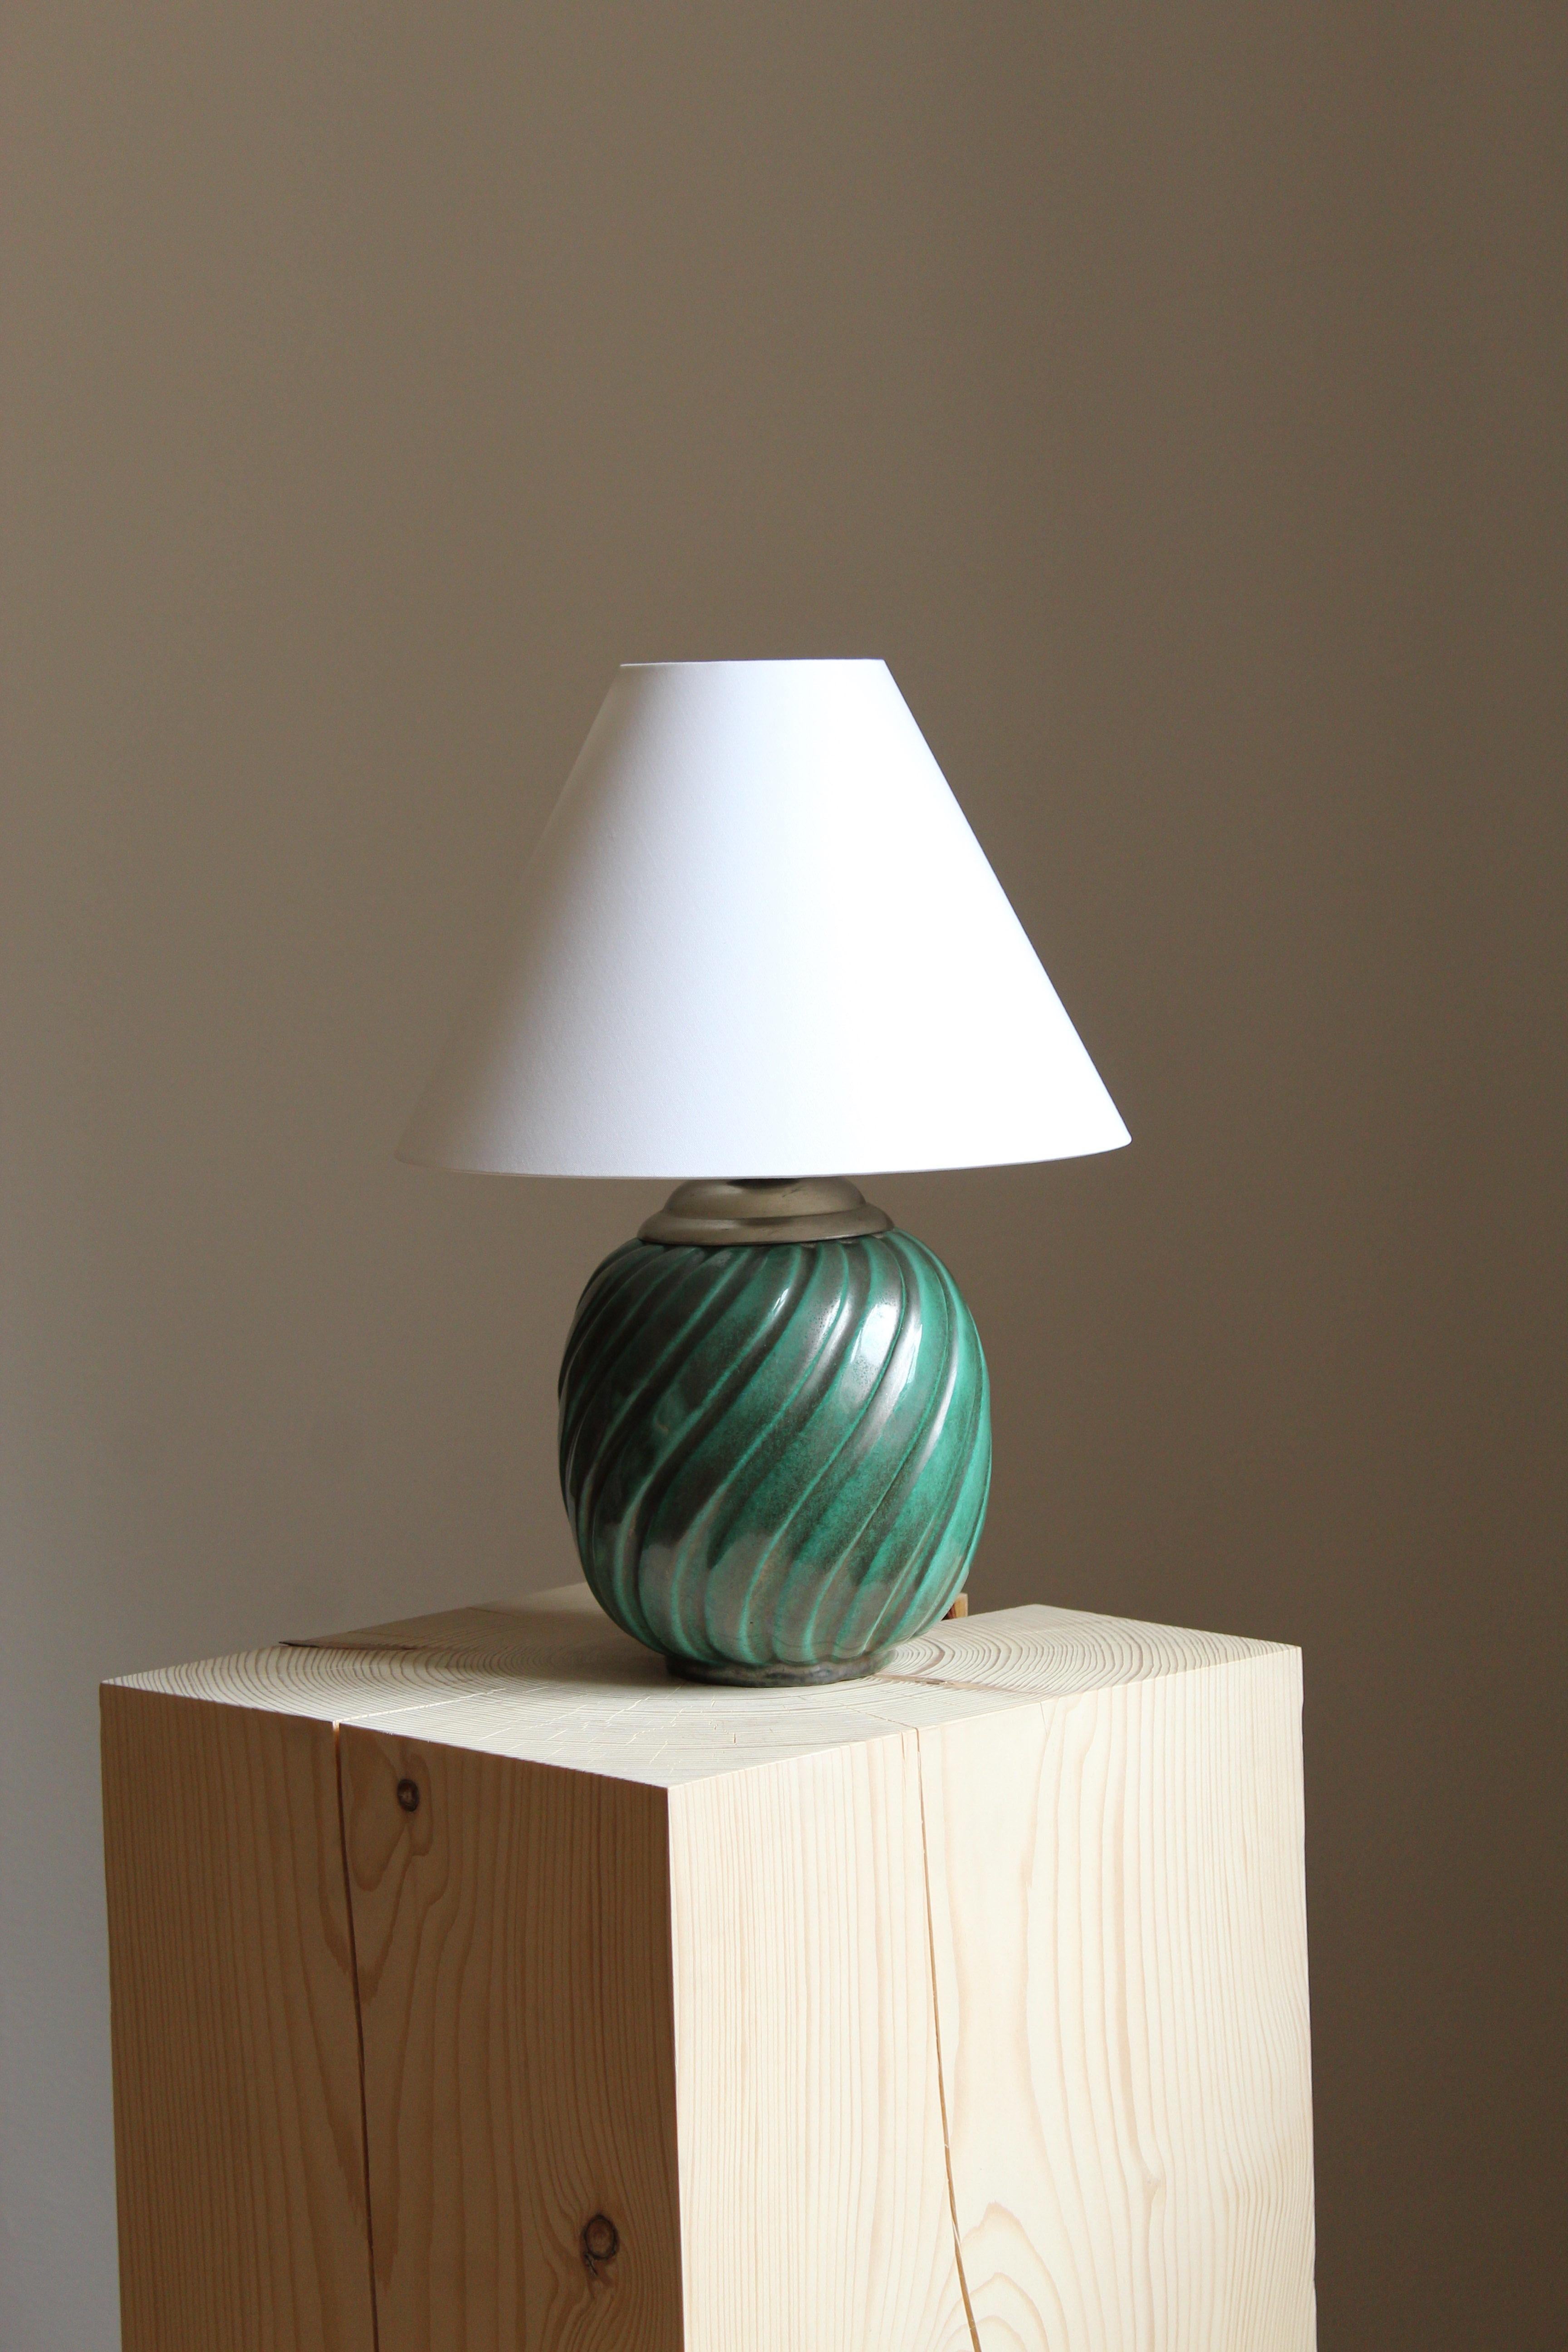 A sizable table lamp by iconic Swedish ceramic firm Ekeby. In glazed stoneware. Marked.

Sold without lampshade, stated dimensions excluding lampshade. 

Other designers of the period include Axel Salto, Carl Harry Stålhane, Berndt Friberg, Lisa